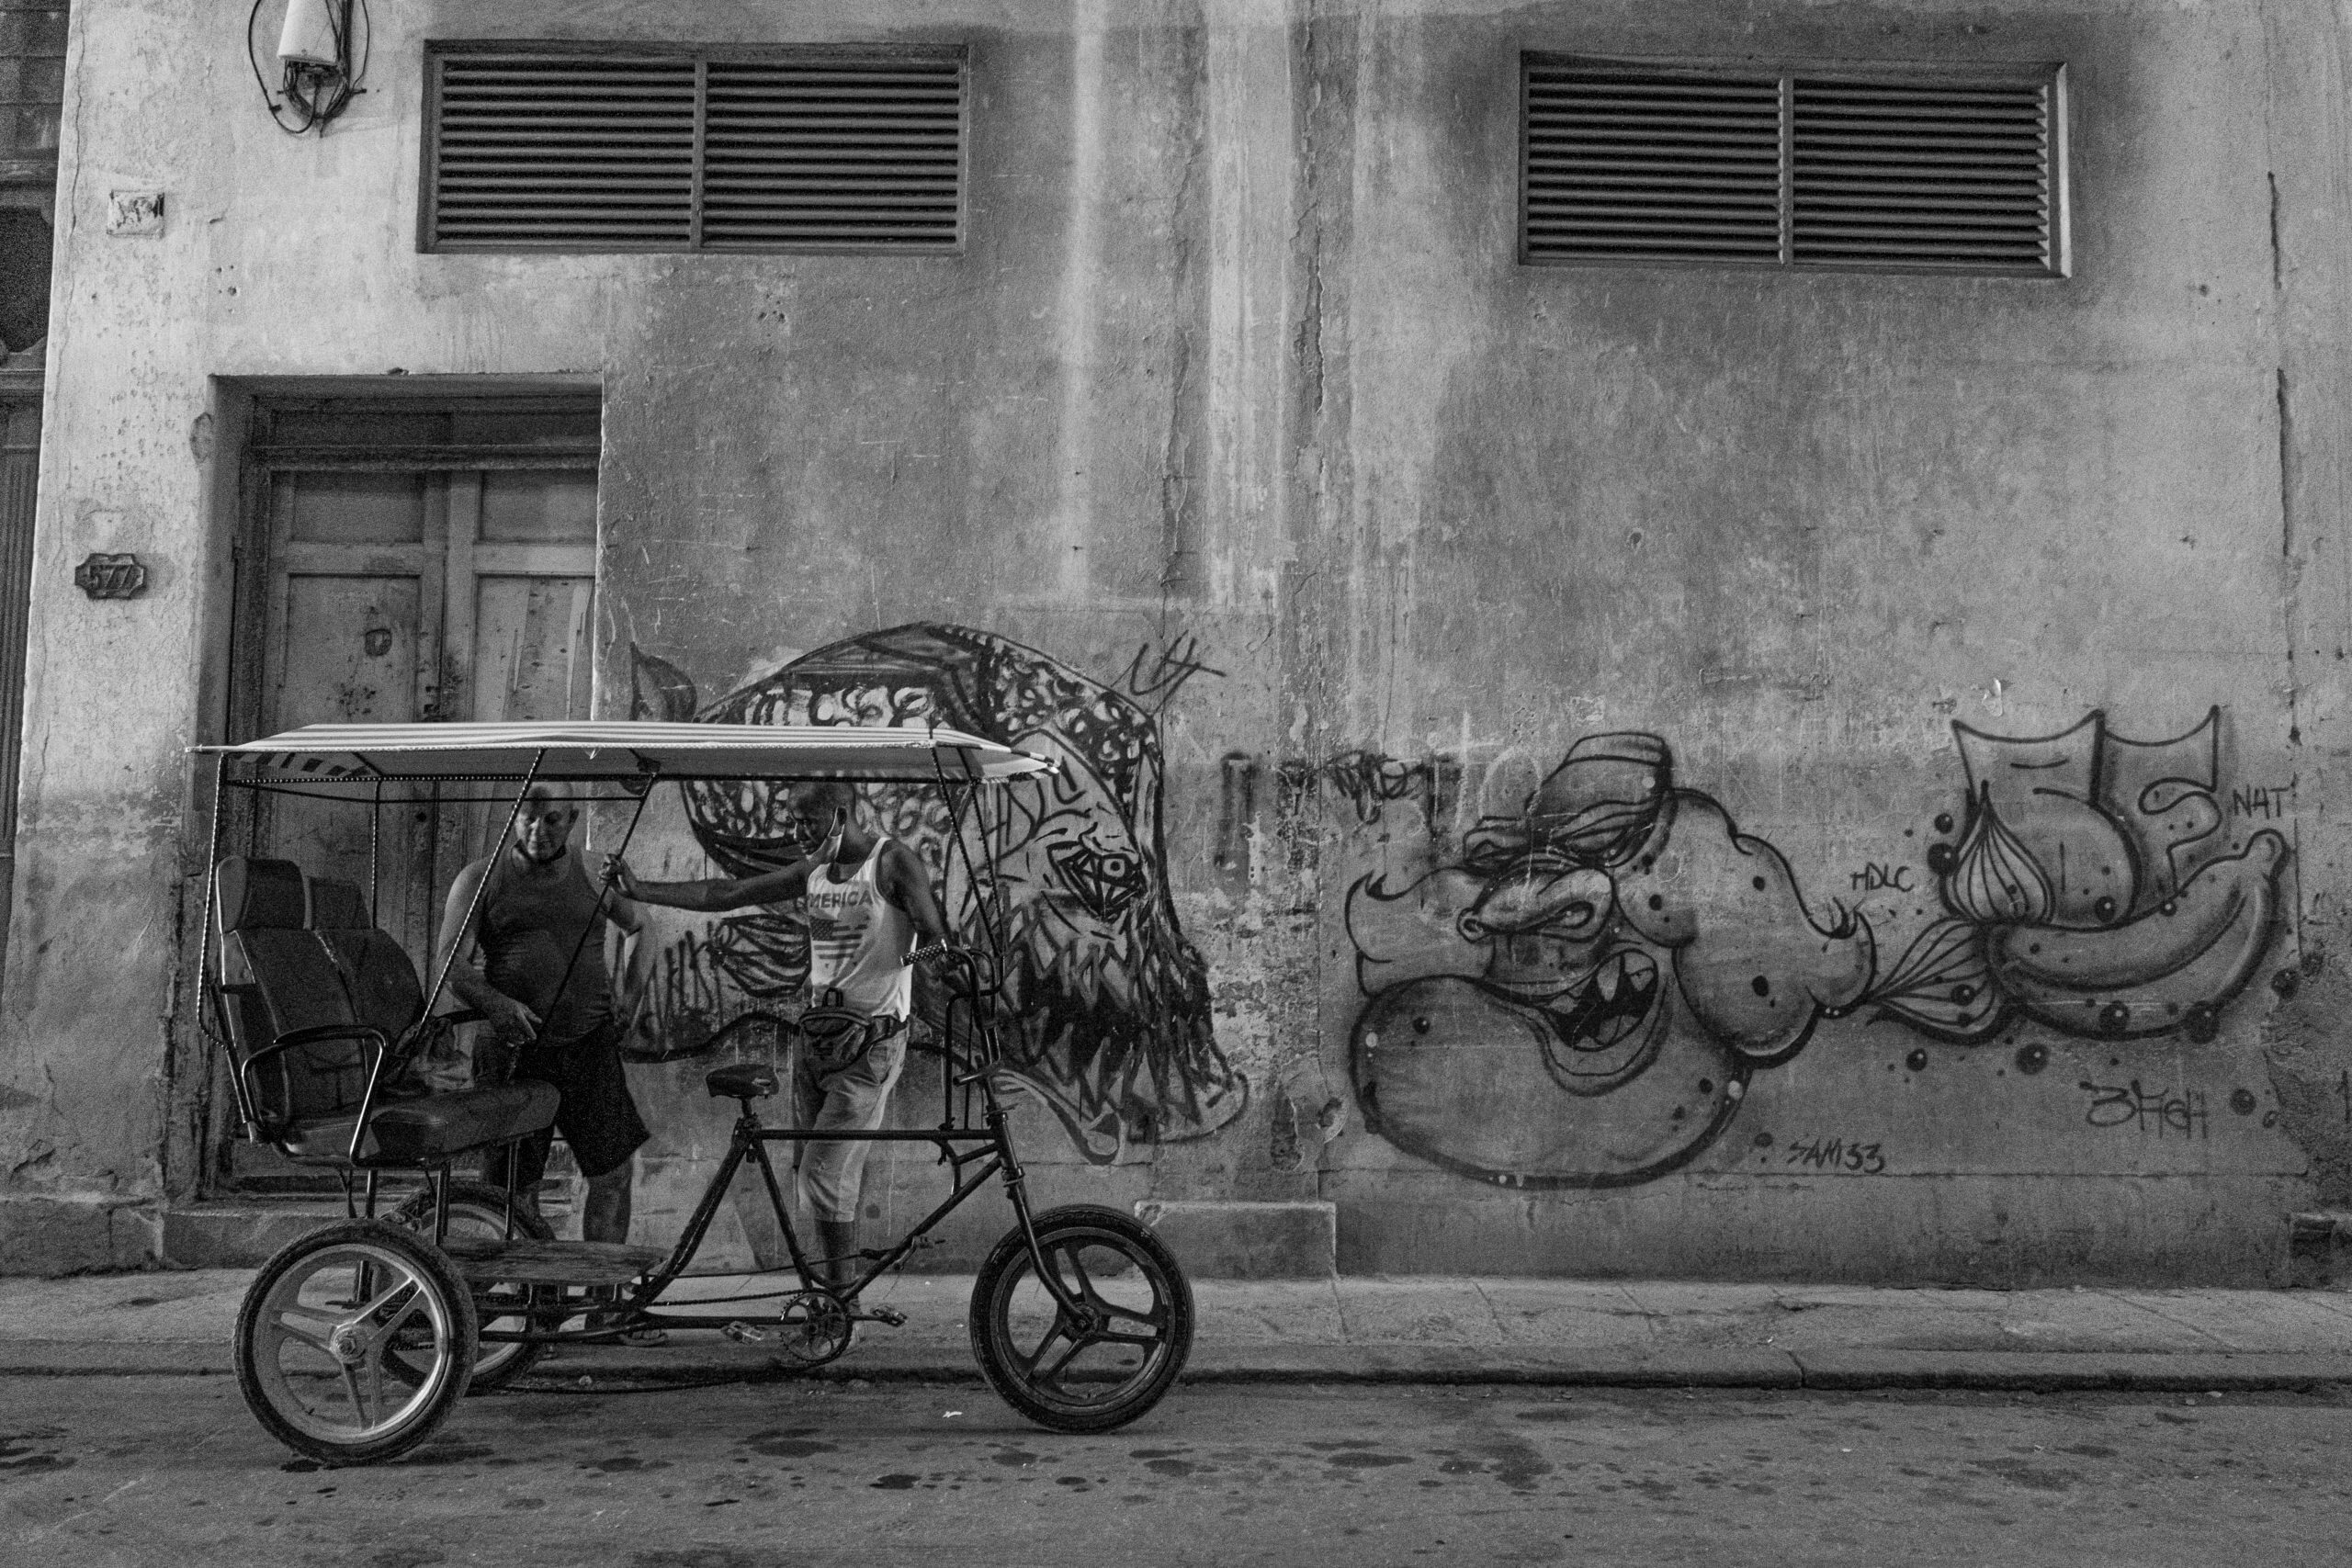 Cubans continue to struggle under adverse economic conditions, as evidenced by this scene in the Habana Centro district of the capital. © 2022 John D. Elliott • www.TheHumanPulse.com